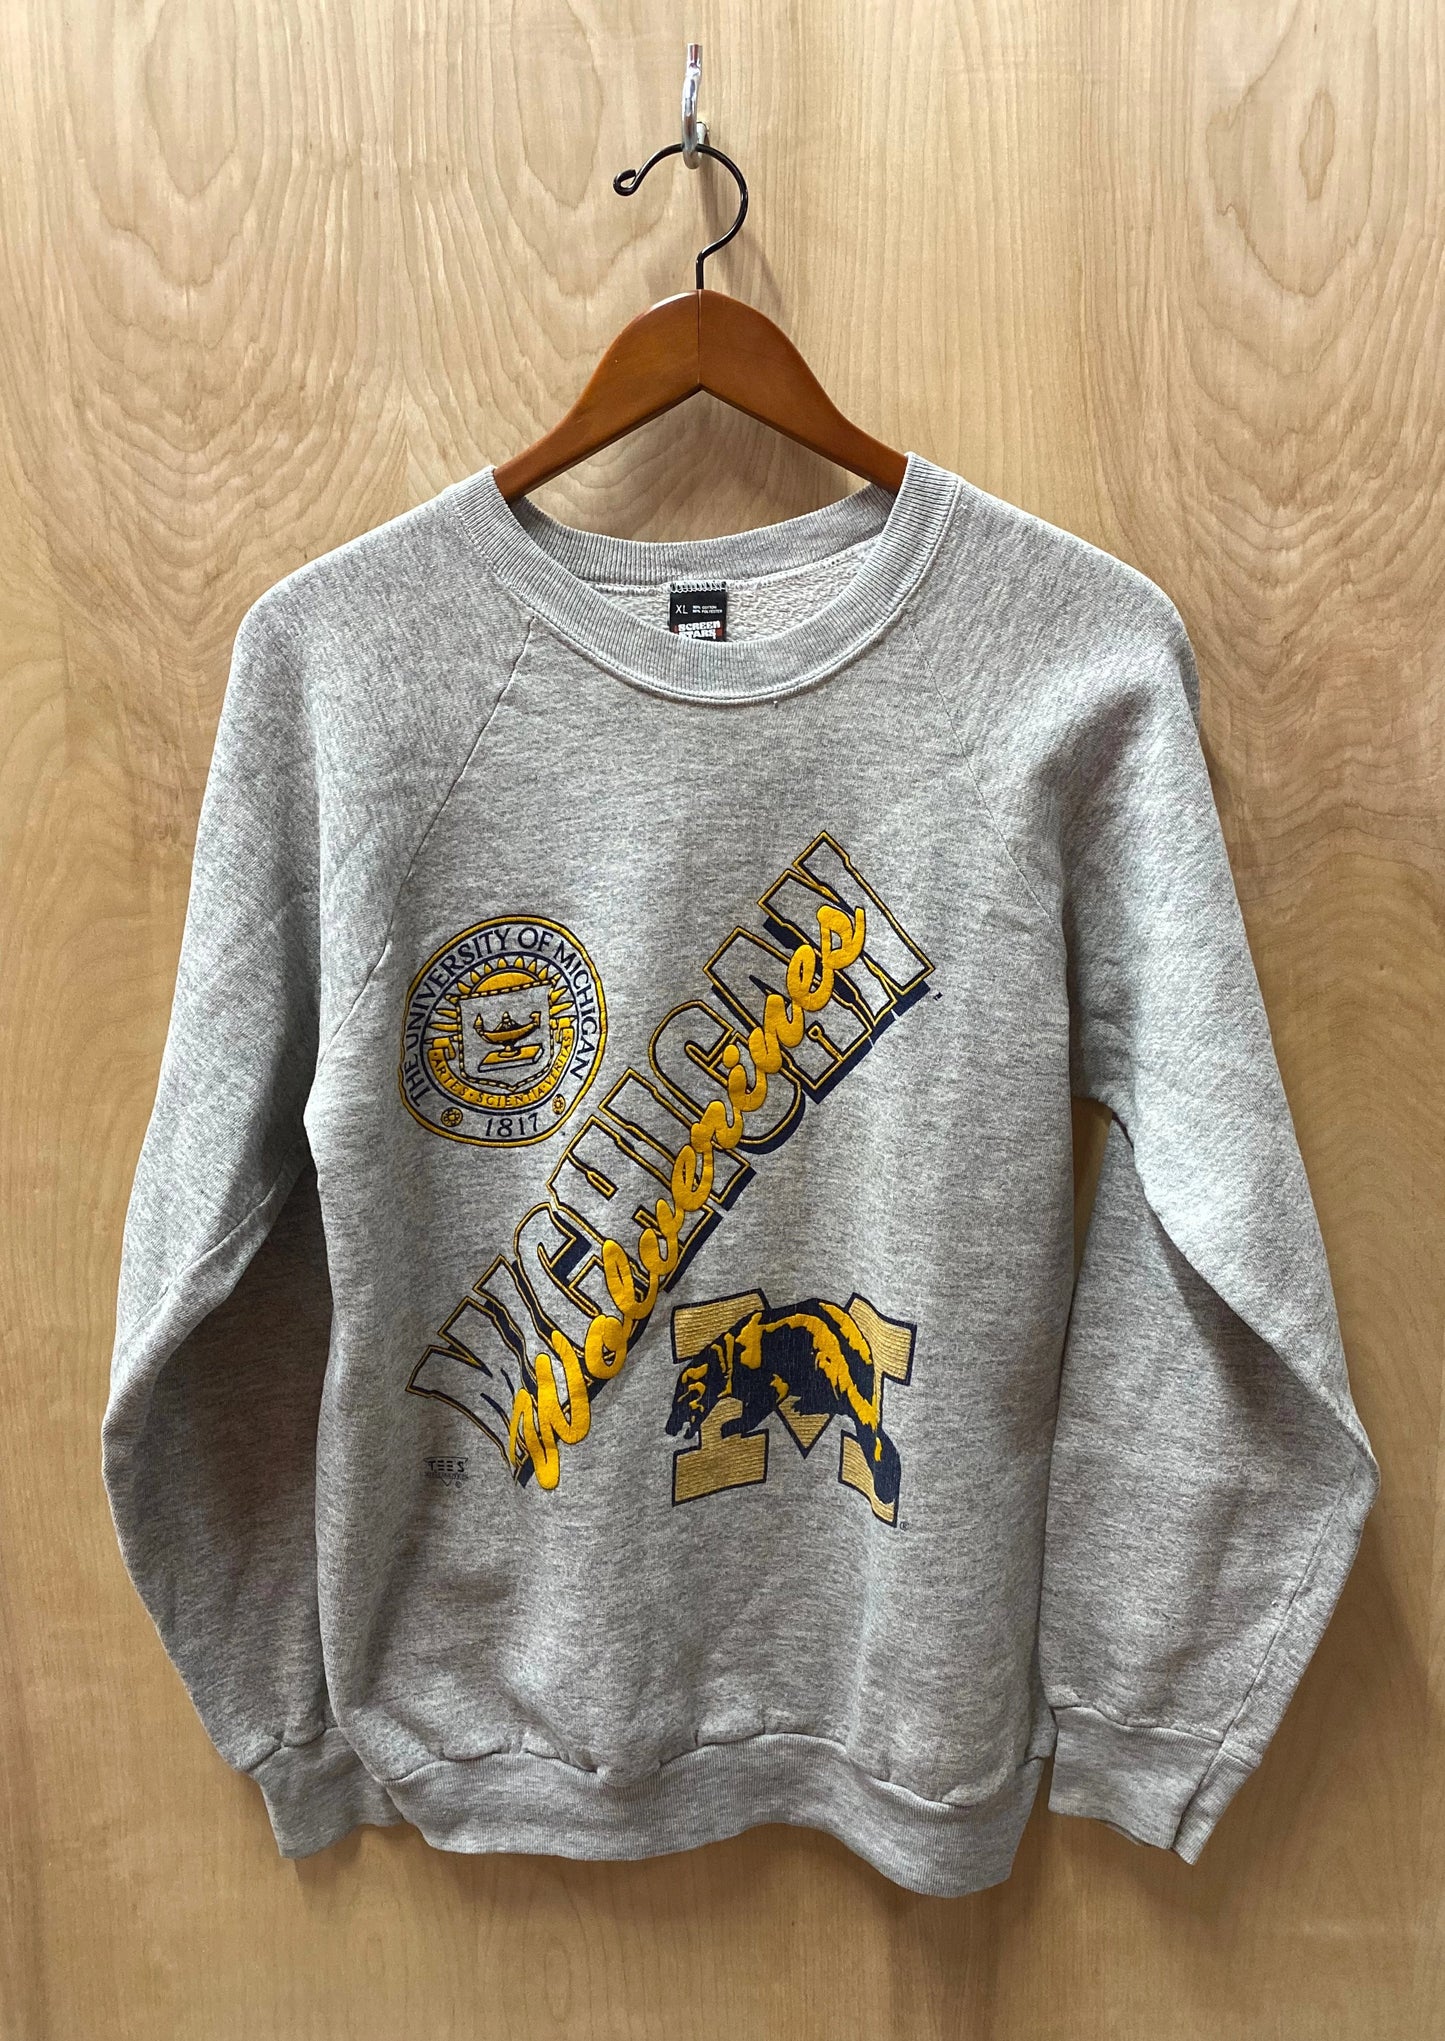 Load image into Gallery viewer, Michigan State Wolverines Crewneck (6537440919632)
